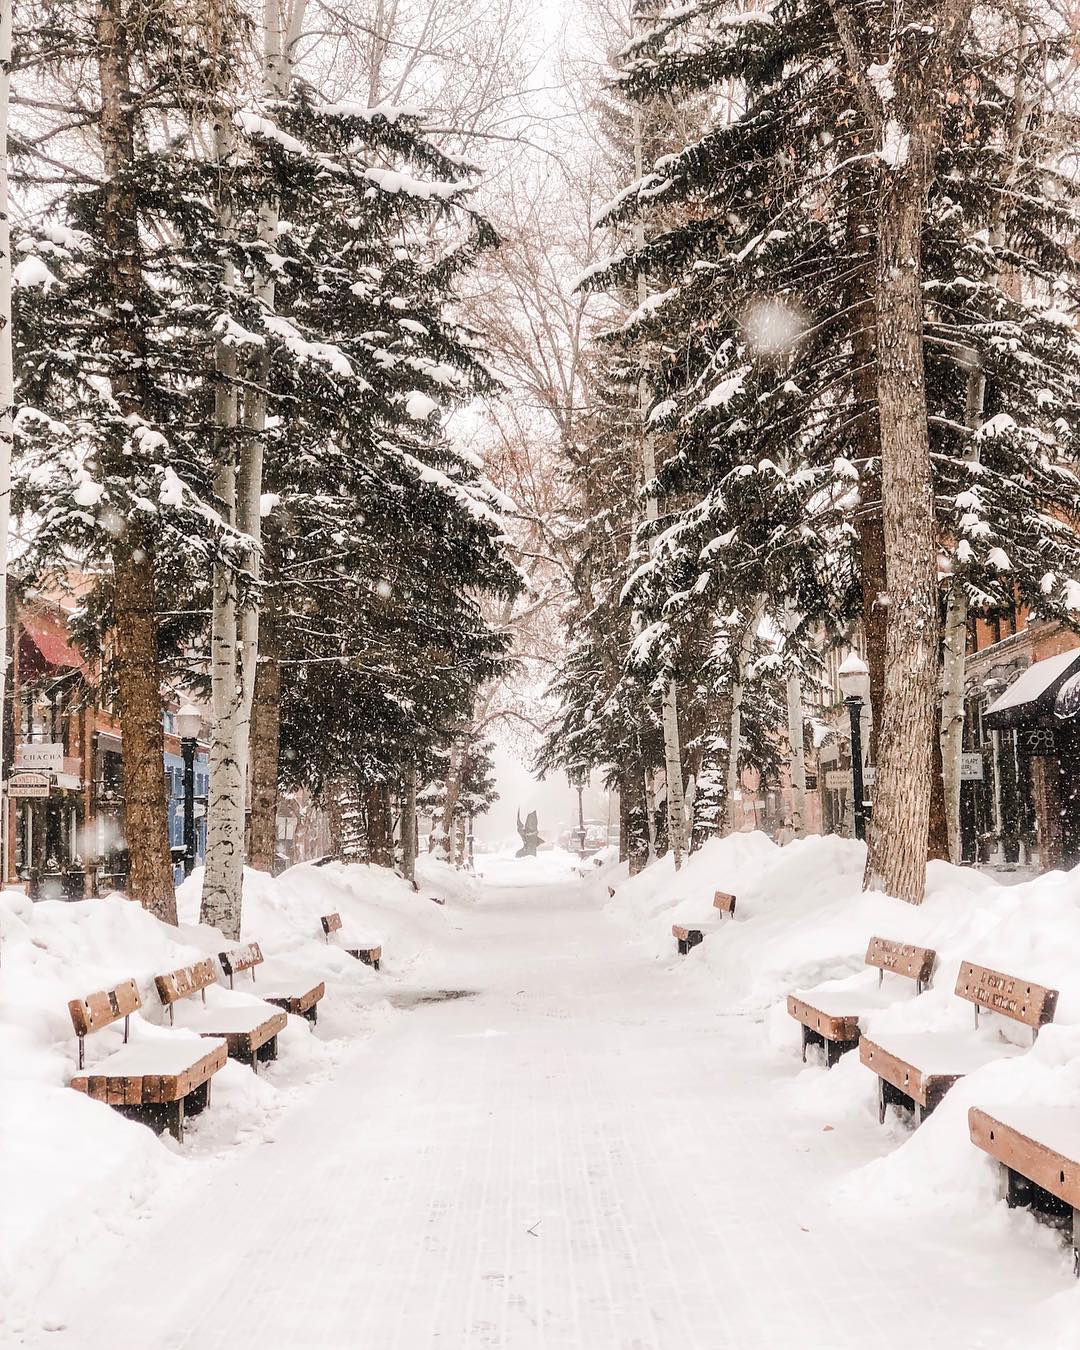 Snow falling down on big trees and sidewalk in Aspen, CO. Photo by Instagram user @hotelaspen